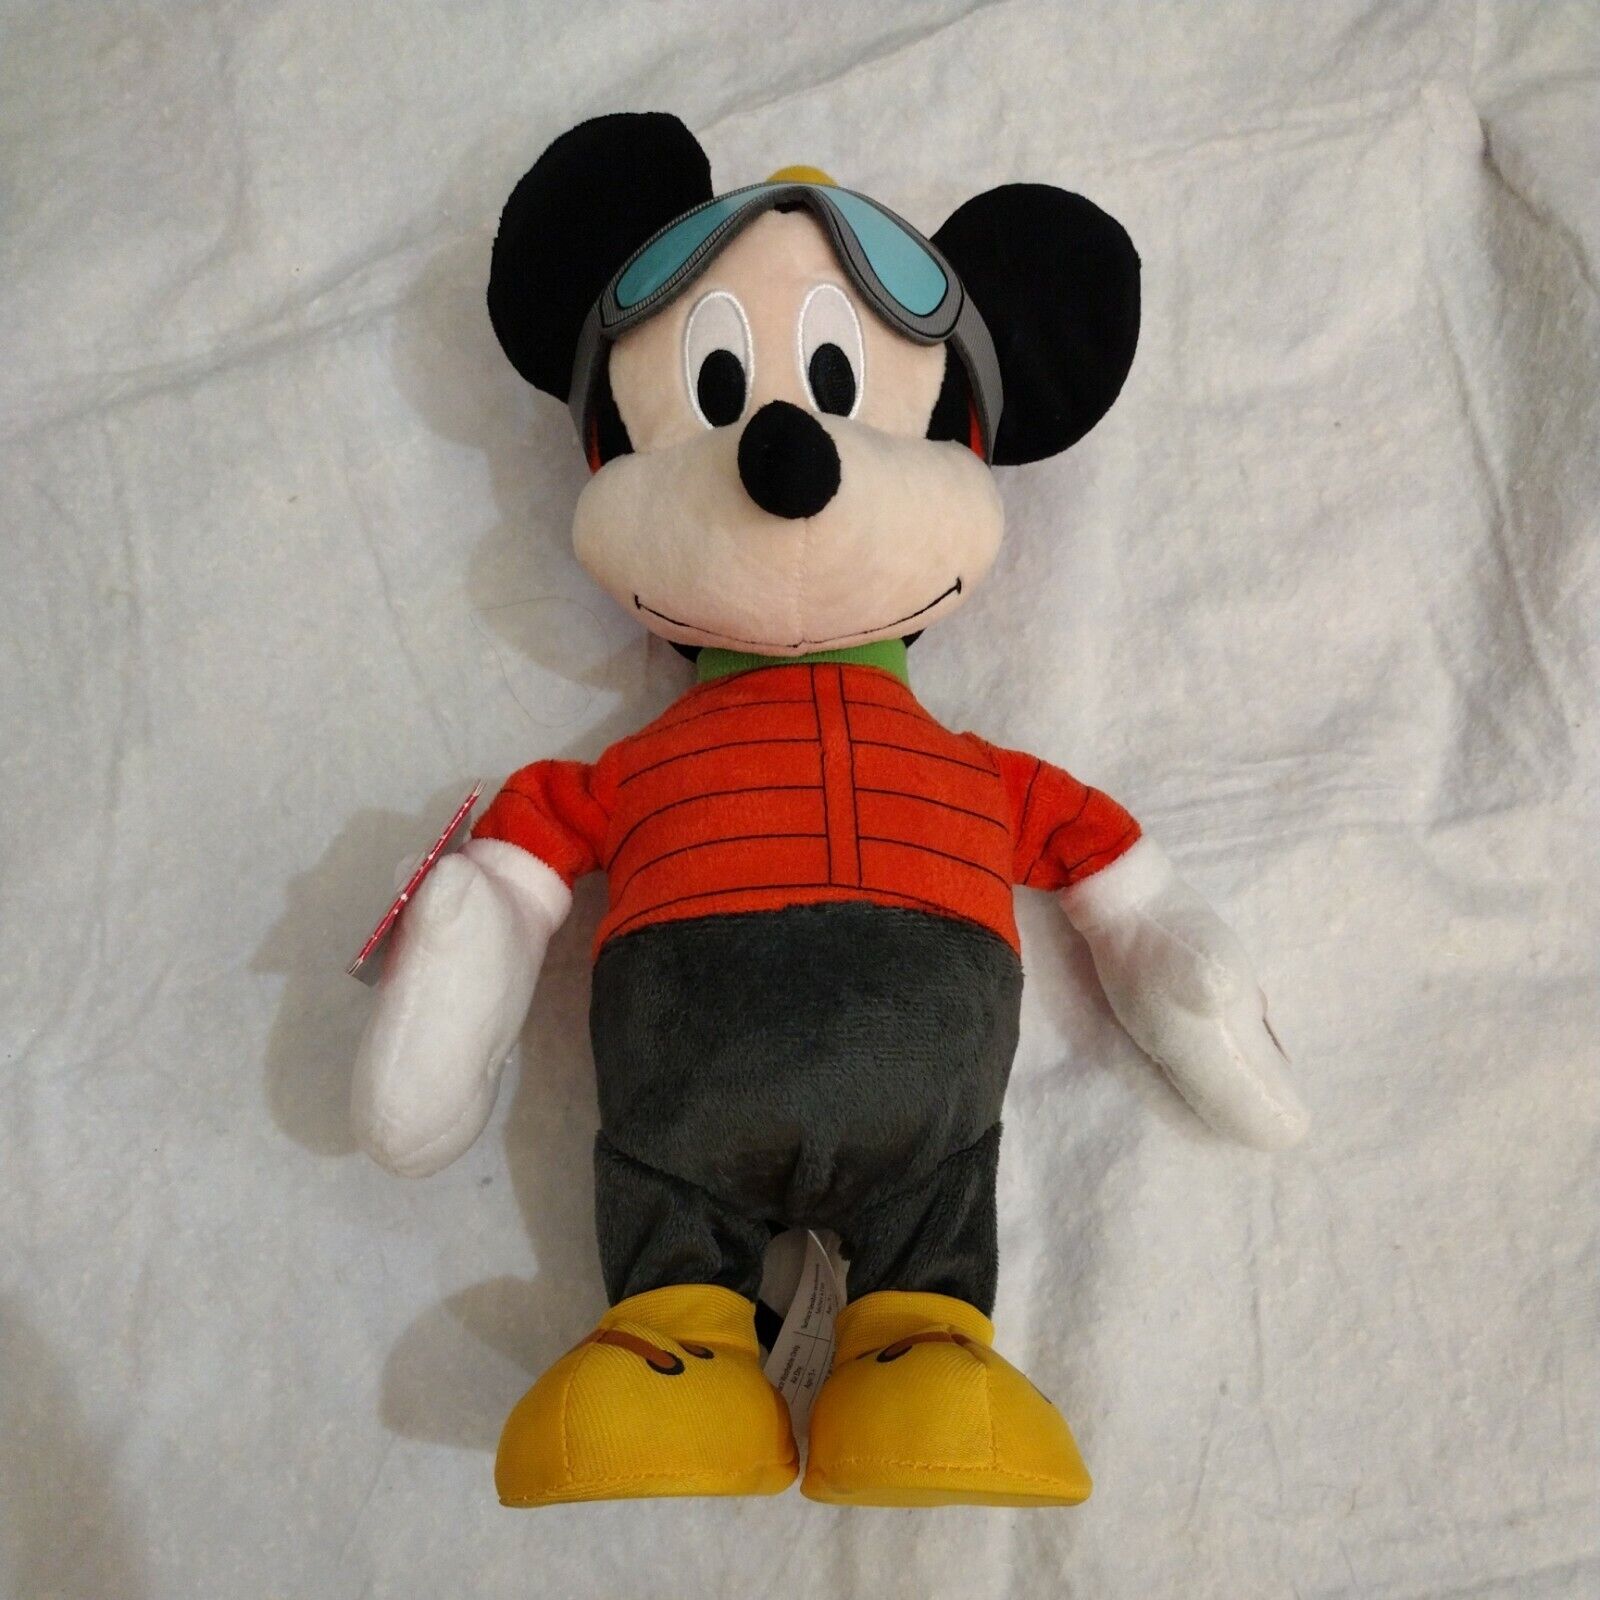 Disney Minnie Mouse Animated Plush Dancing Doll Musical Jingle Bells Just Play 